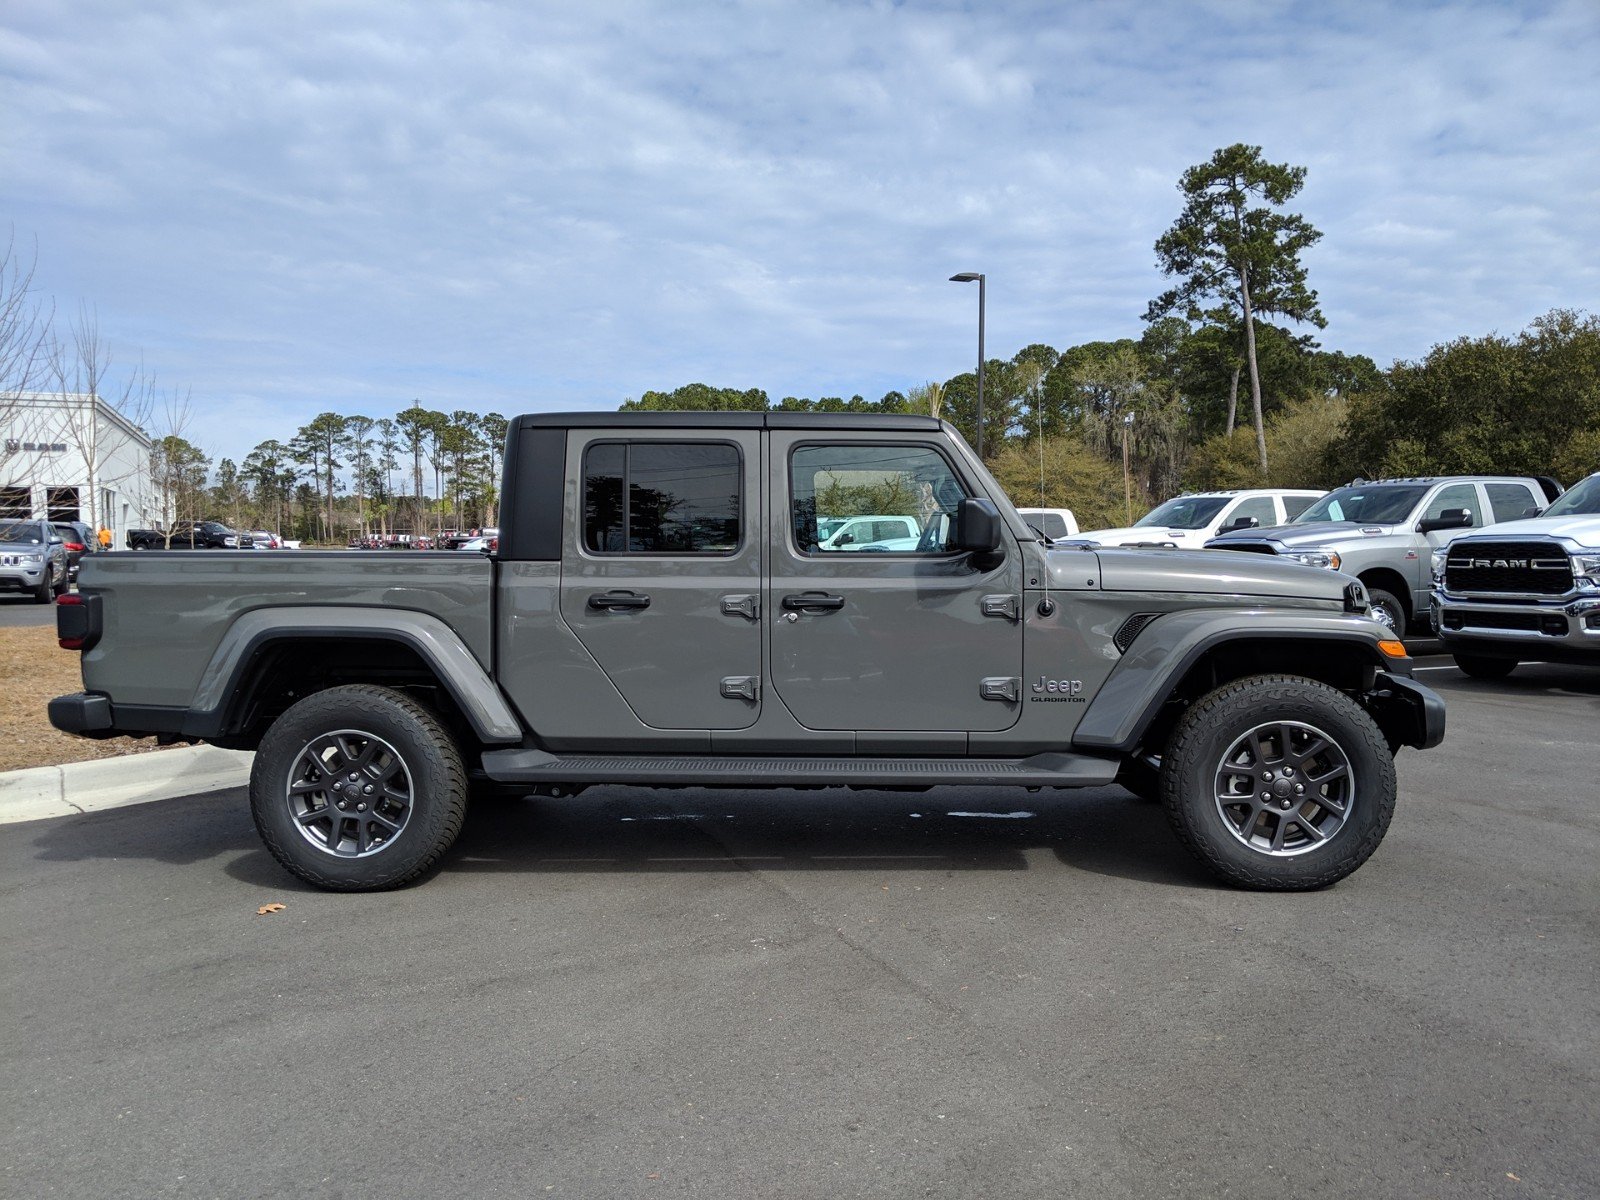 New 2020 Jeep Gladiator Overland 4D Crew Cab in Beaufort #J185969